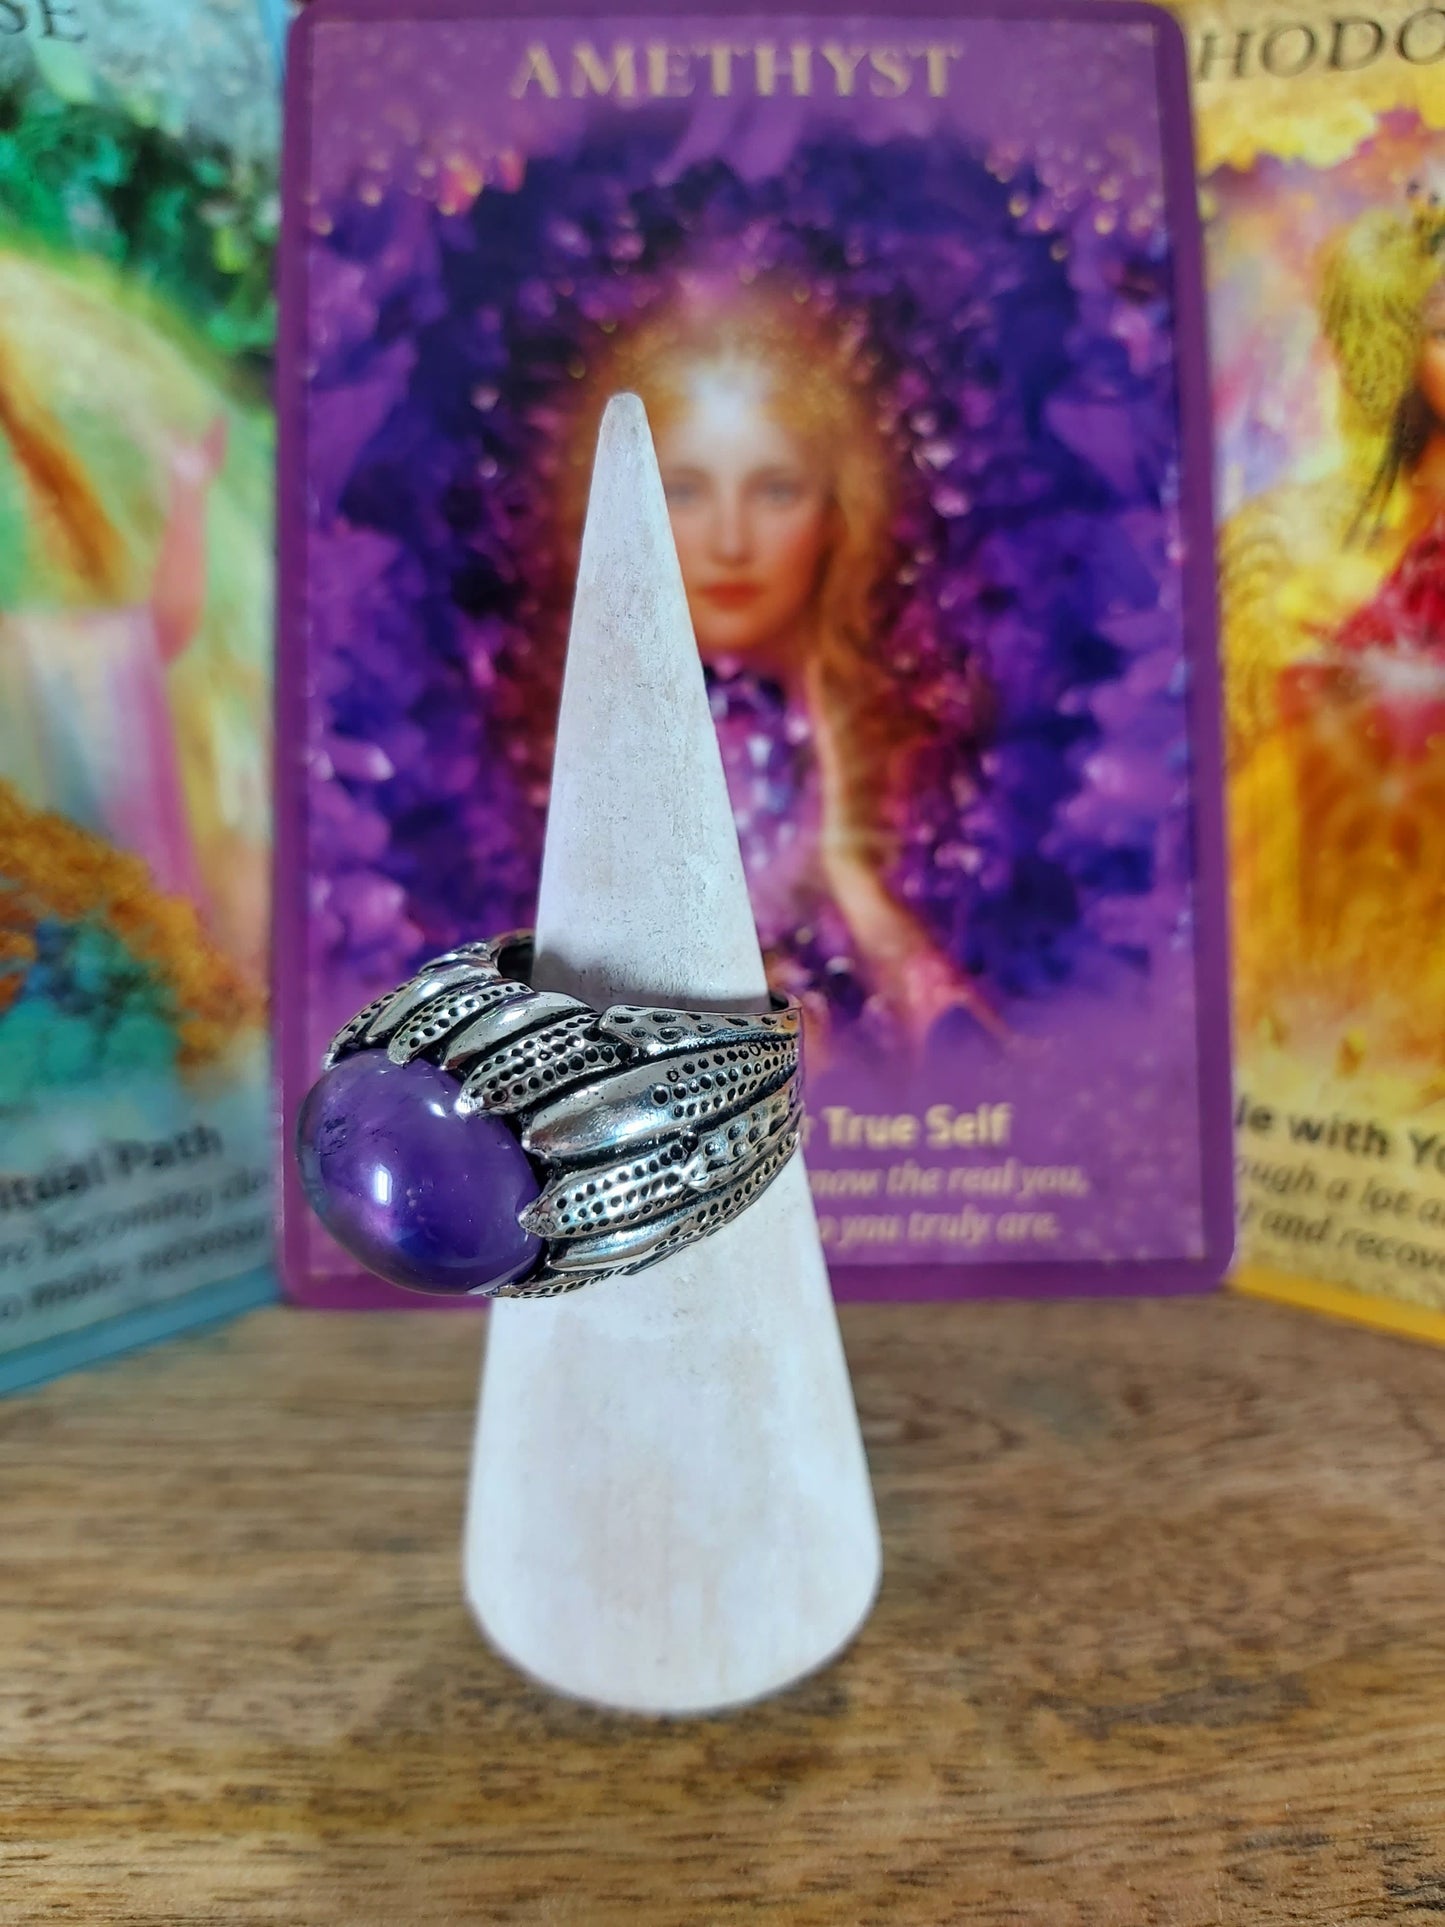 Amethyst Peaceful Energy Ring Size US 7 (E70)